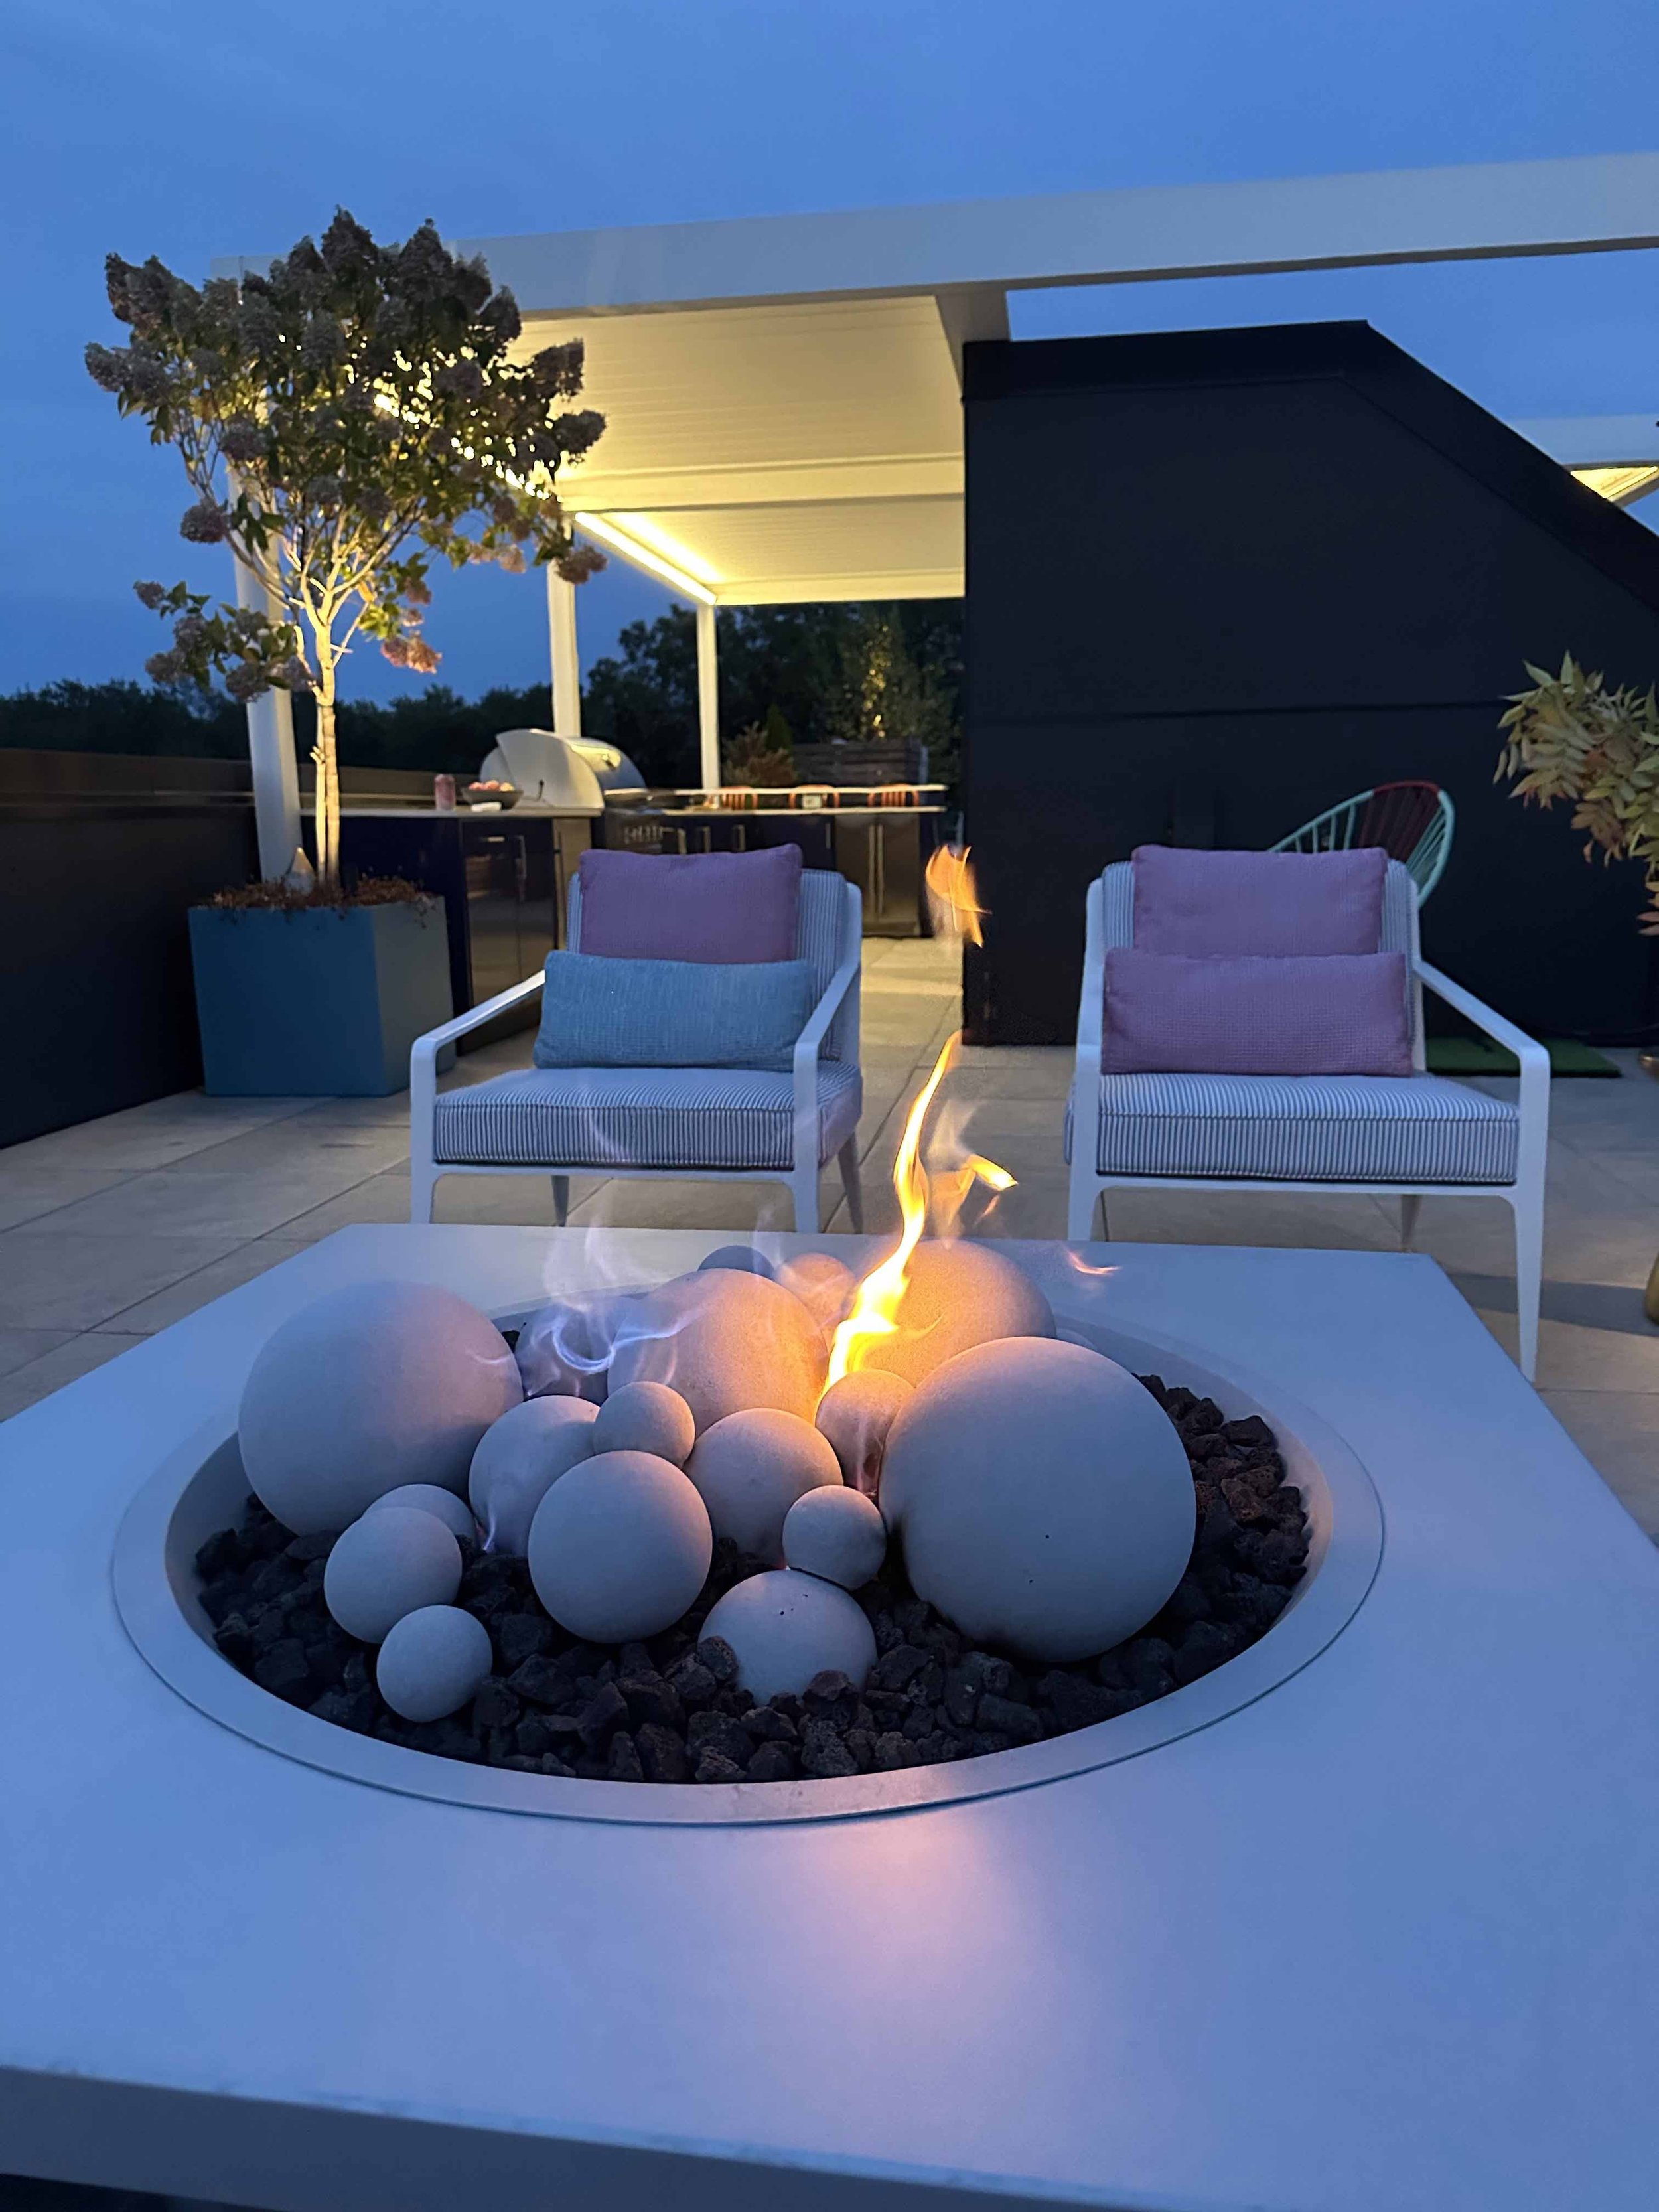 Rooftopia-outdoorliving-deck-lakeview-chicago-firetable-furniture.jpg